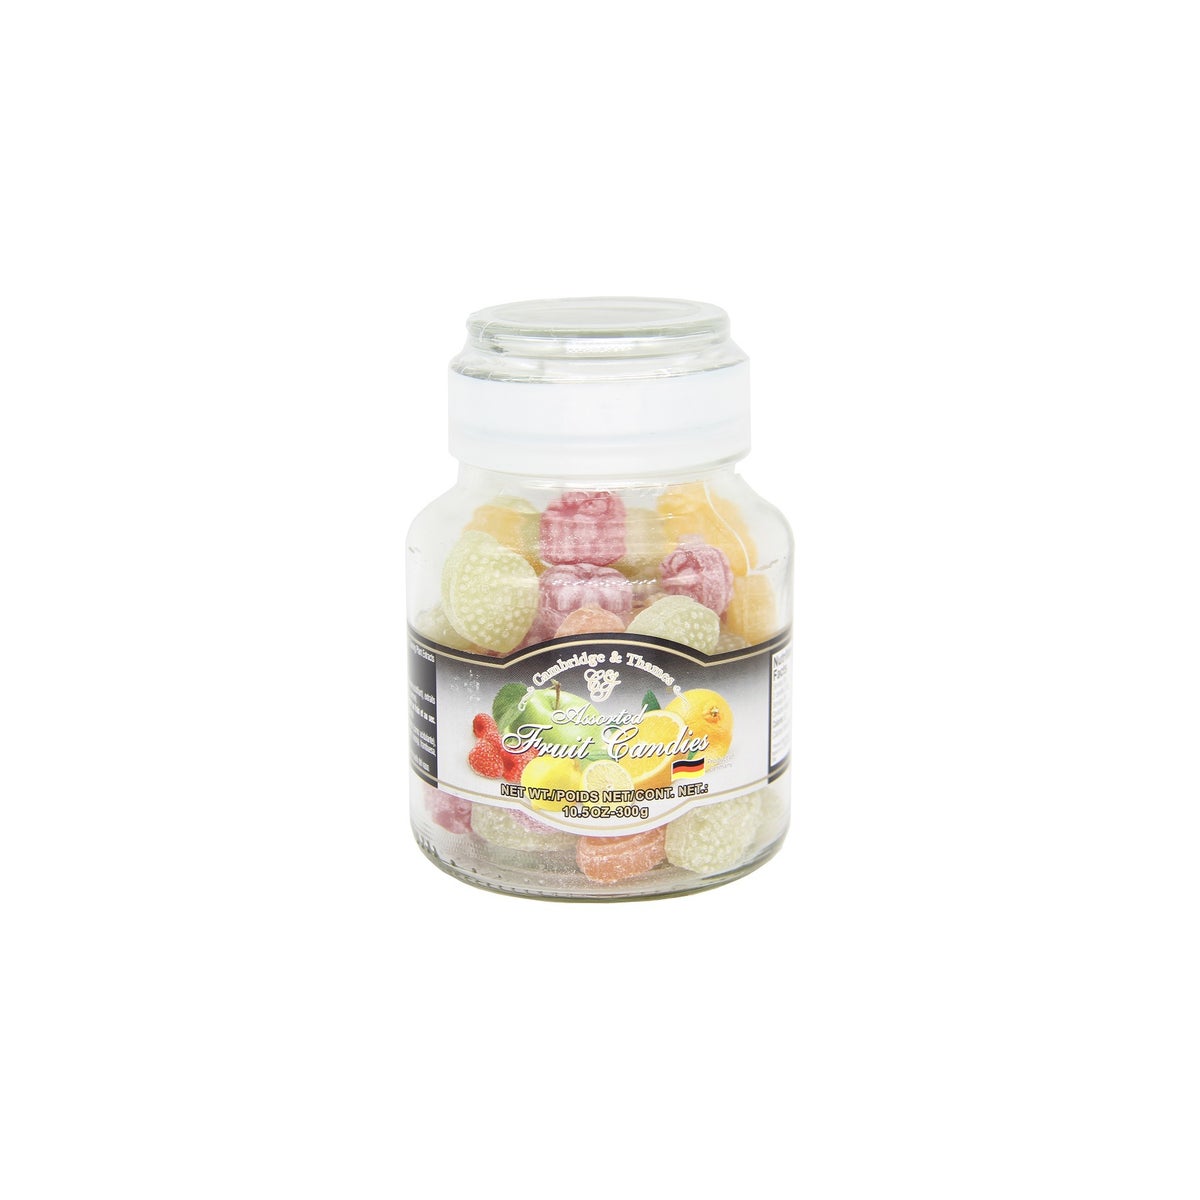 Assorted Candy in Glass Jars - Cambridge & Thames